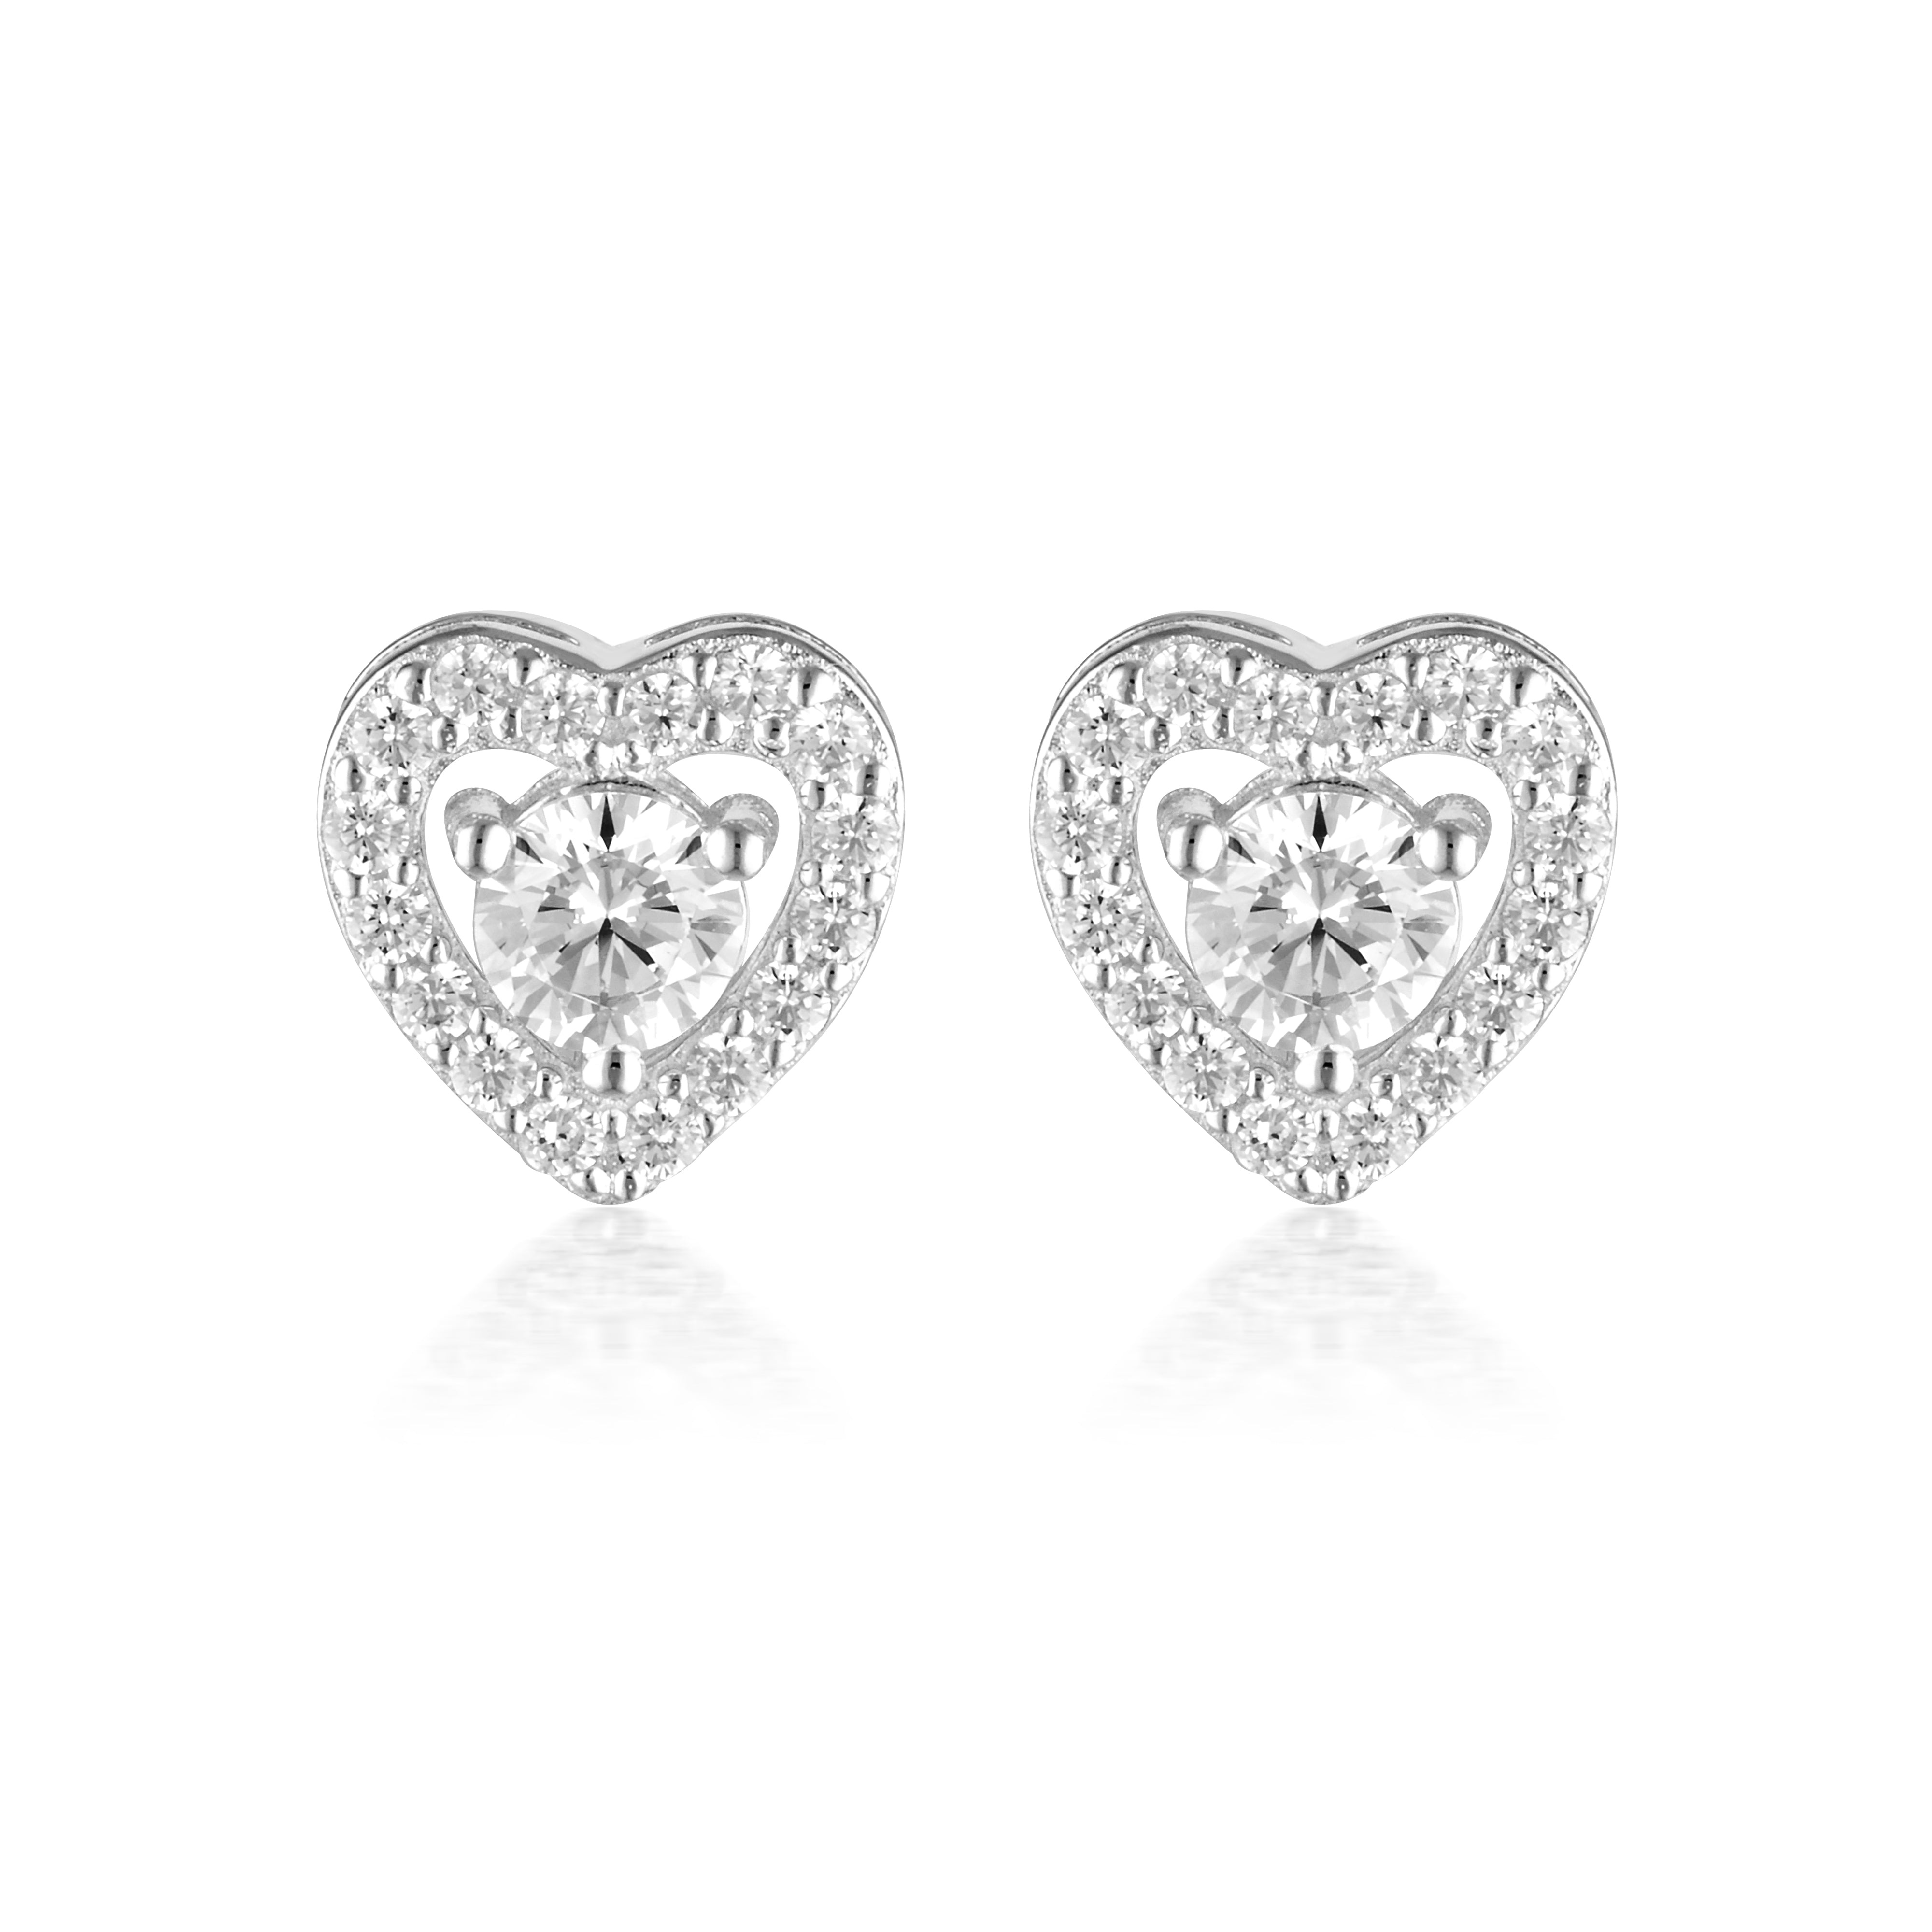 SIGNATURE SEALED WITH A KISS EARRINGS SILVER